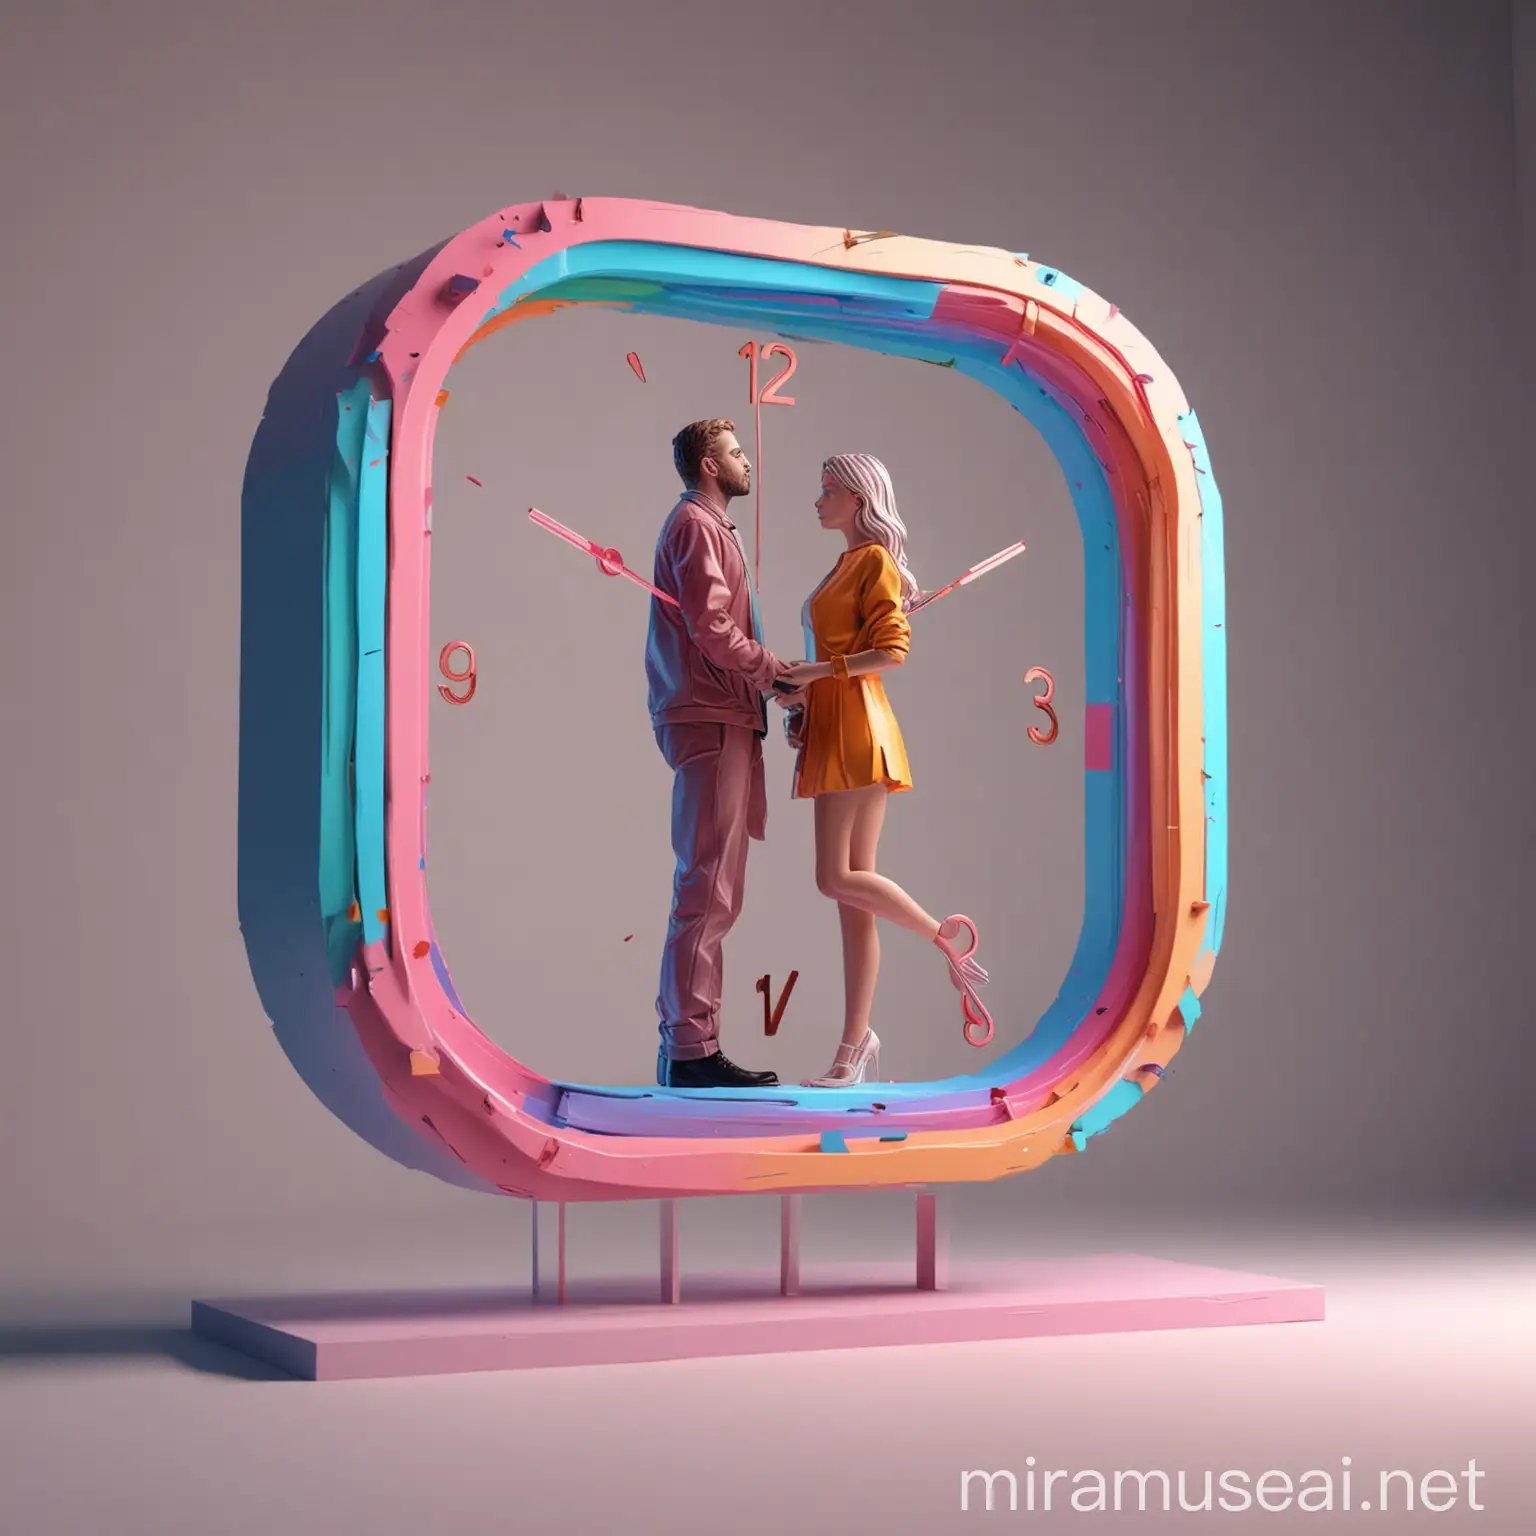 Minimal Beauty Girl and Her Love Man Inside Colorful Clock